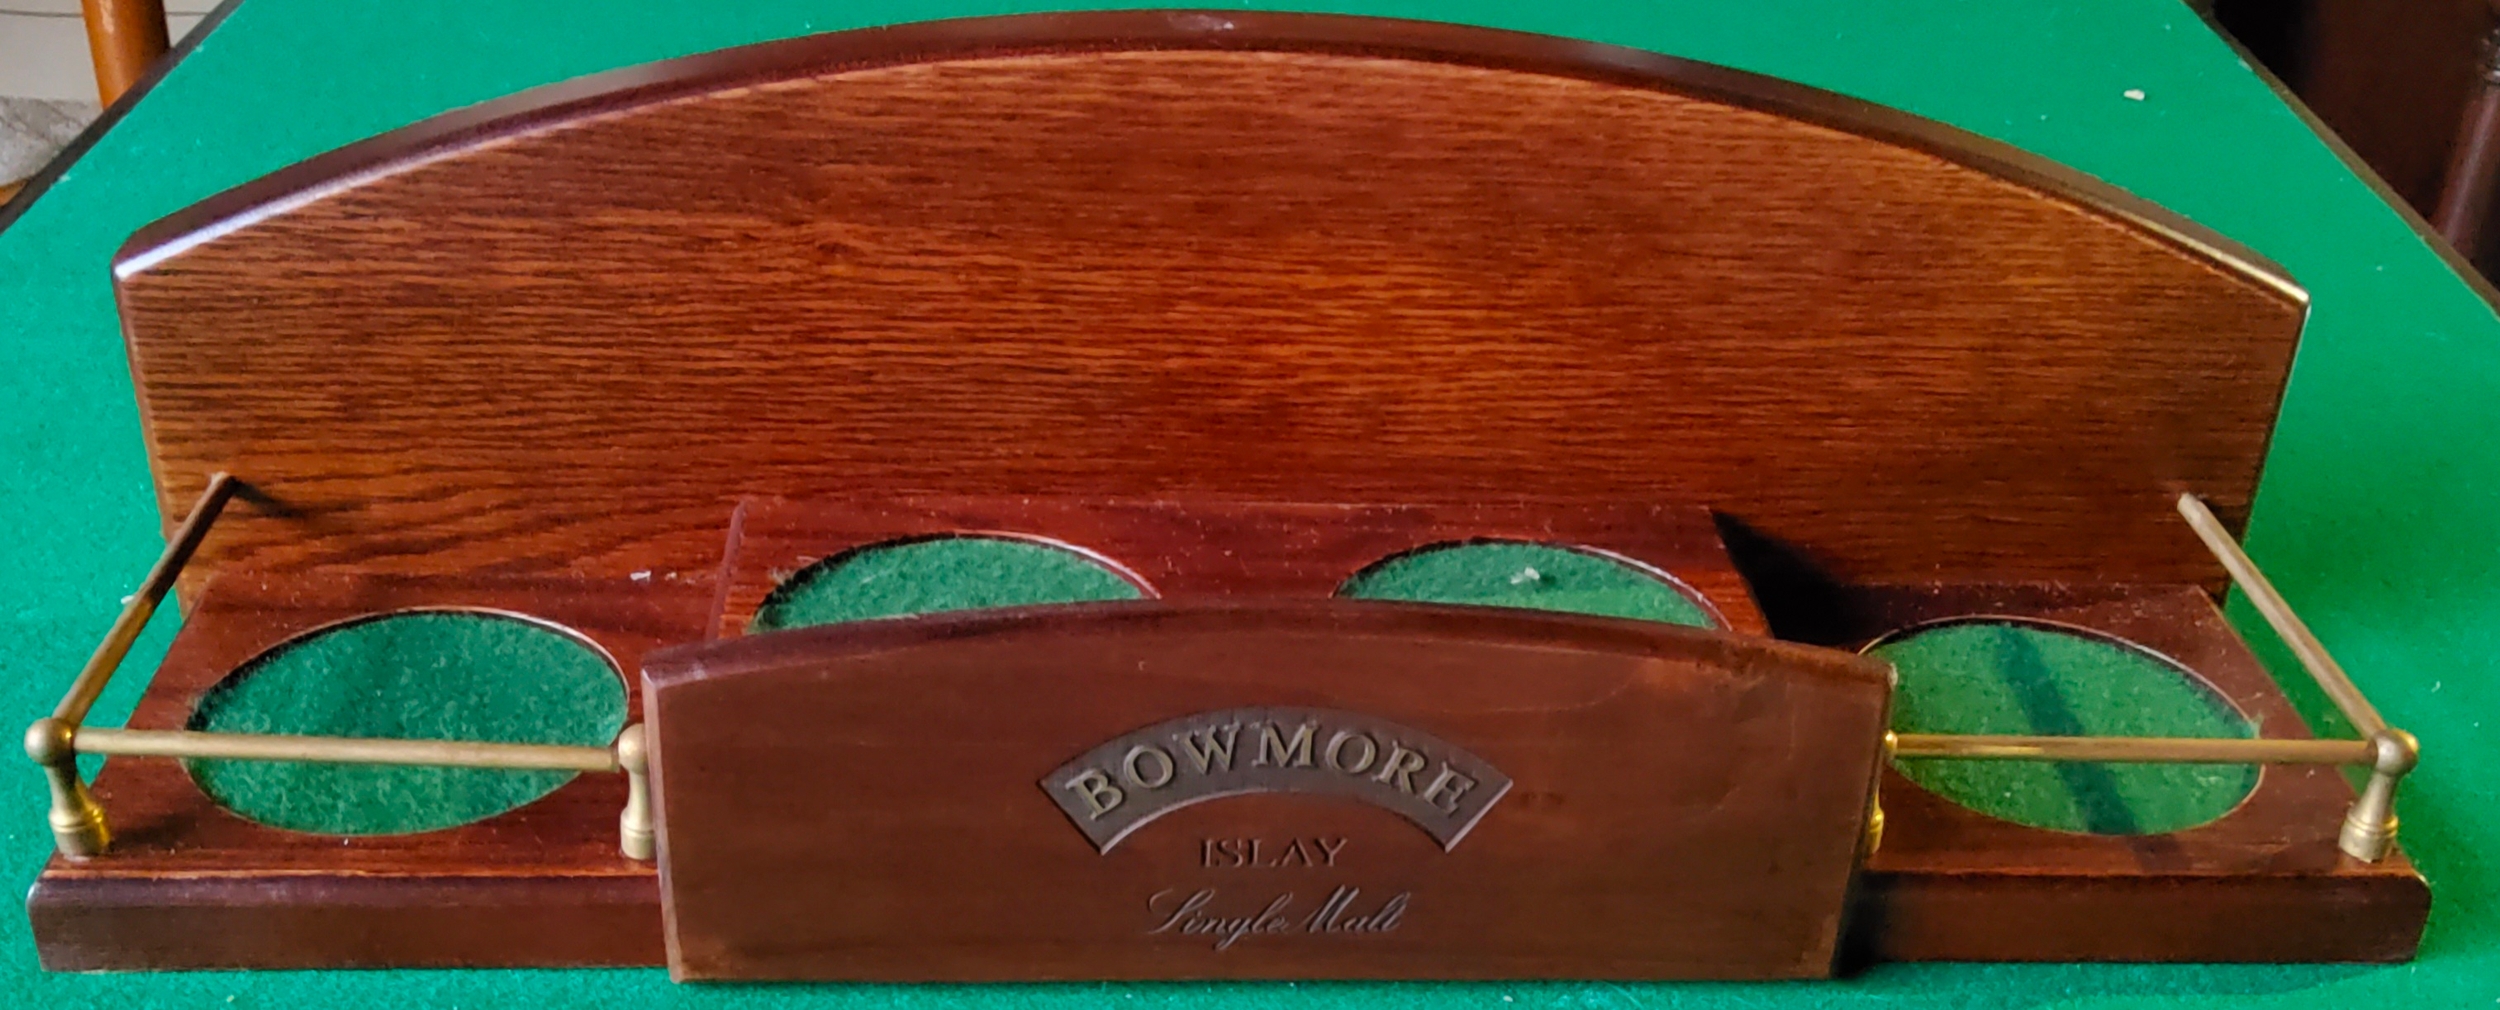 A Bowmore Islay scotch whisky bar shelf display stand, four sections, brass mounted. Excellent